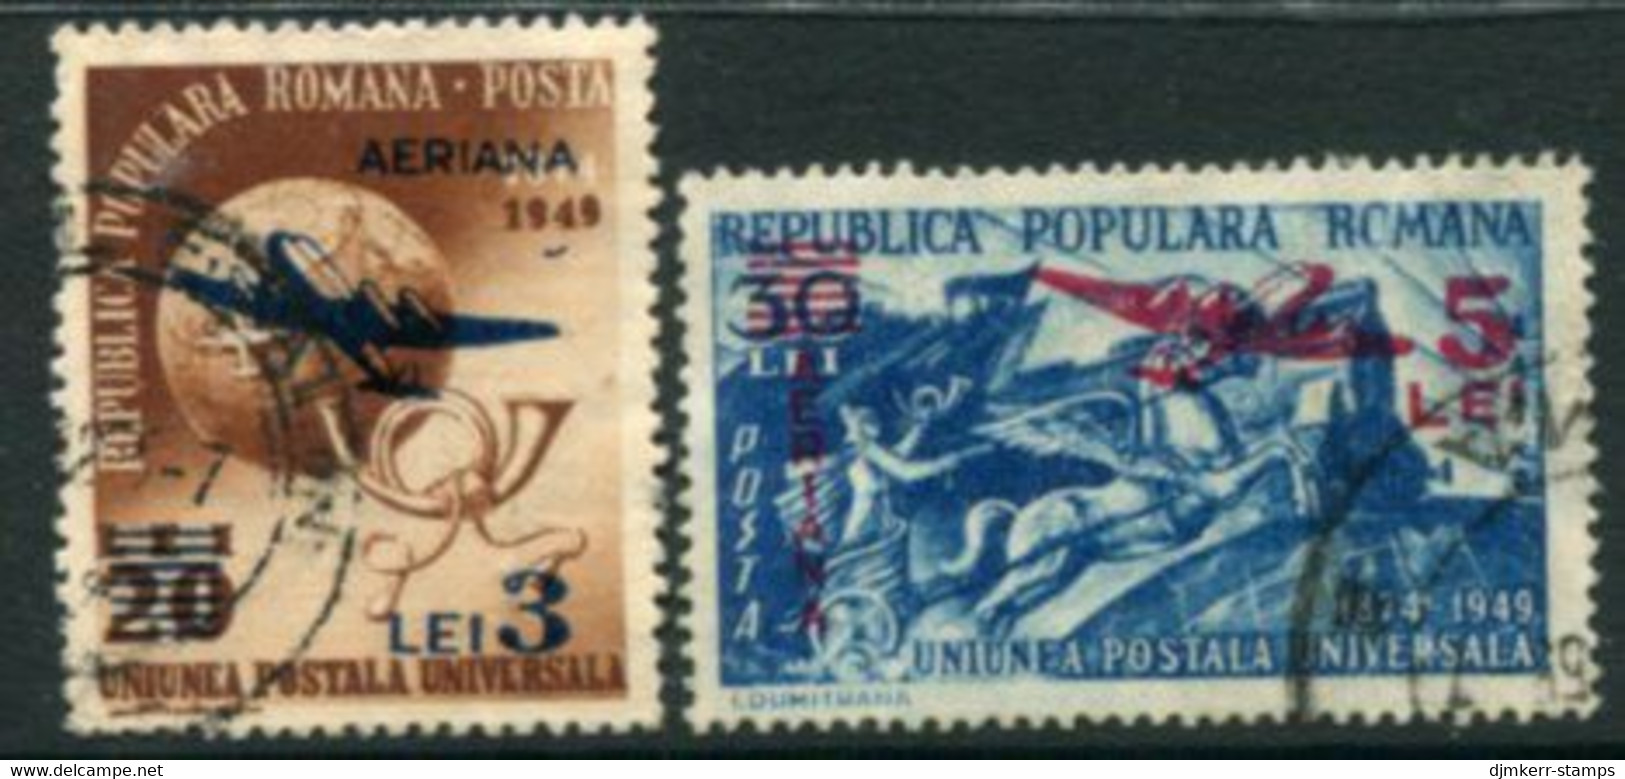 ROMANIA 1952 Currency Reform Surcharge On UPU. Airmail Used.  Michel 1365-66 - Usado